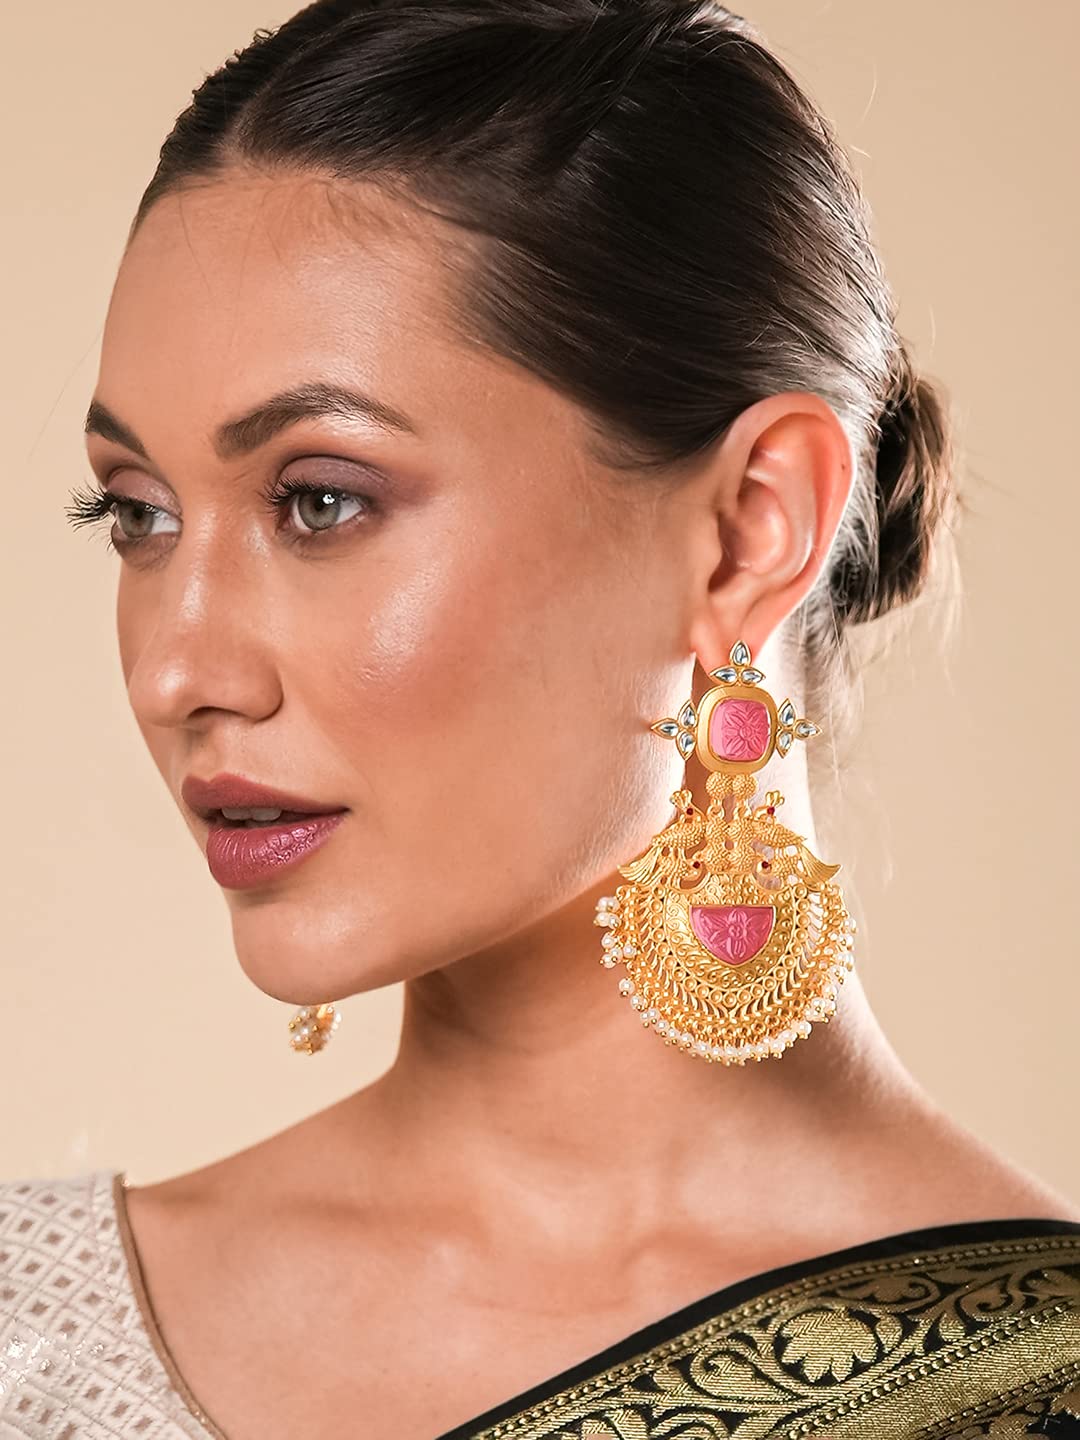 Yellow Chimes Chandbali Earrings for Women Traditional Gold Plated Peacock Shaped Long Chand Bali Earrings for Women and Girls